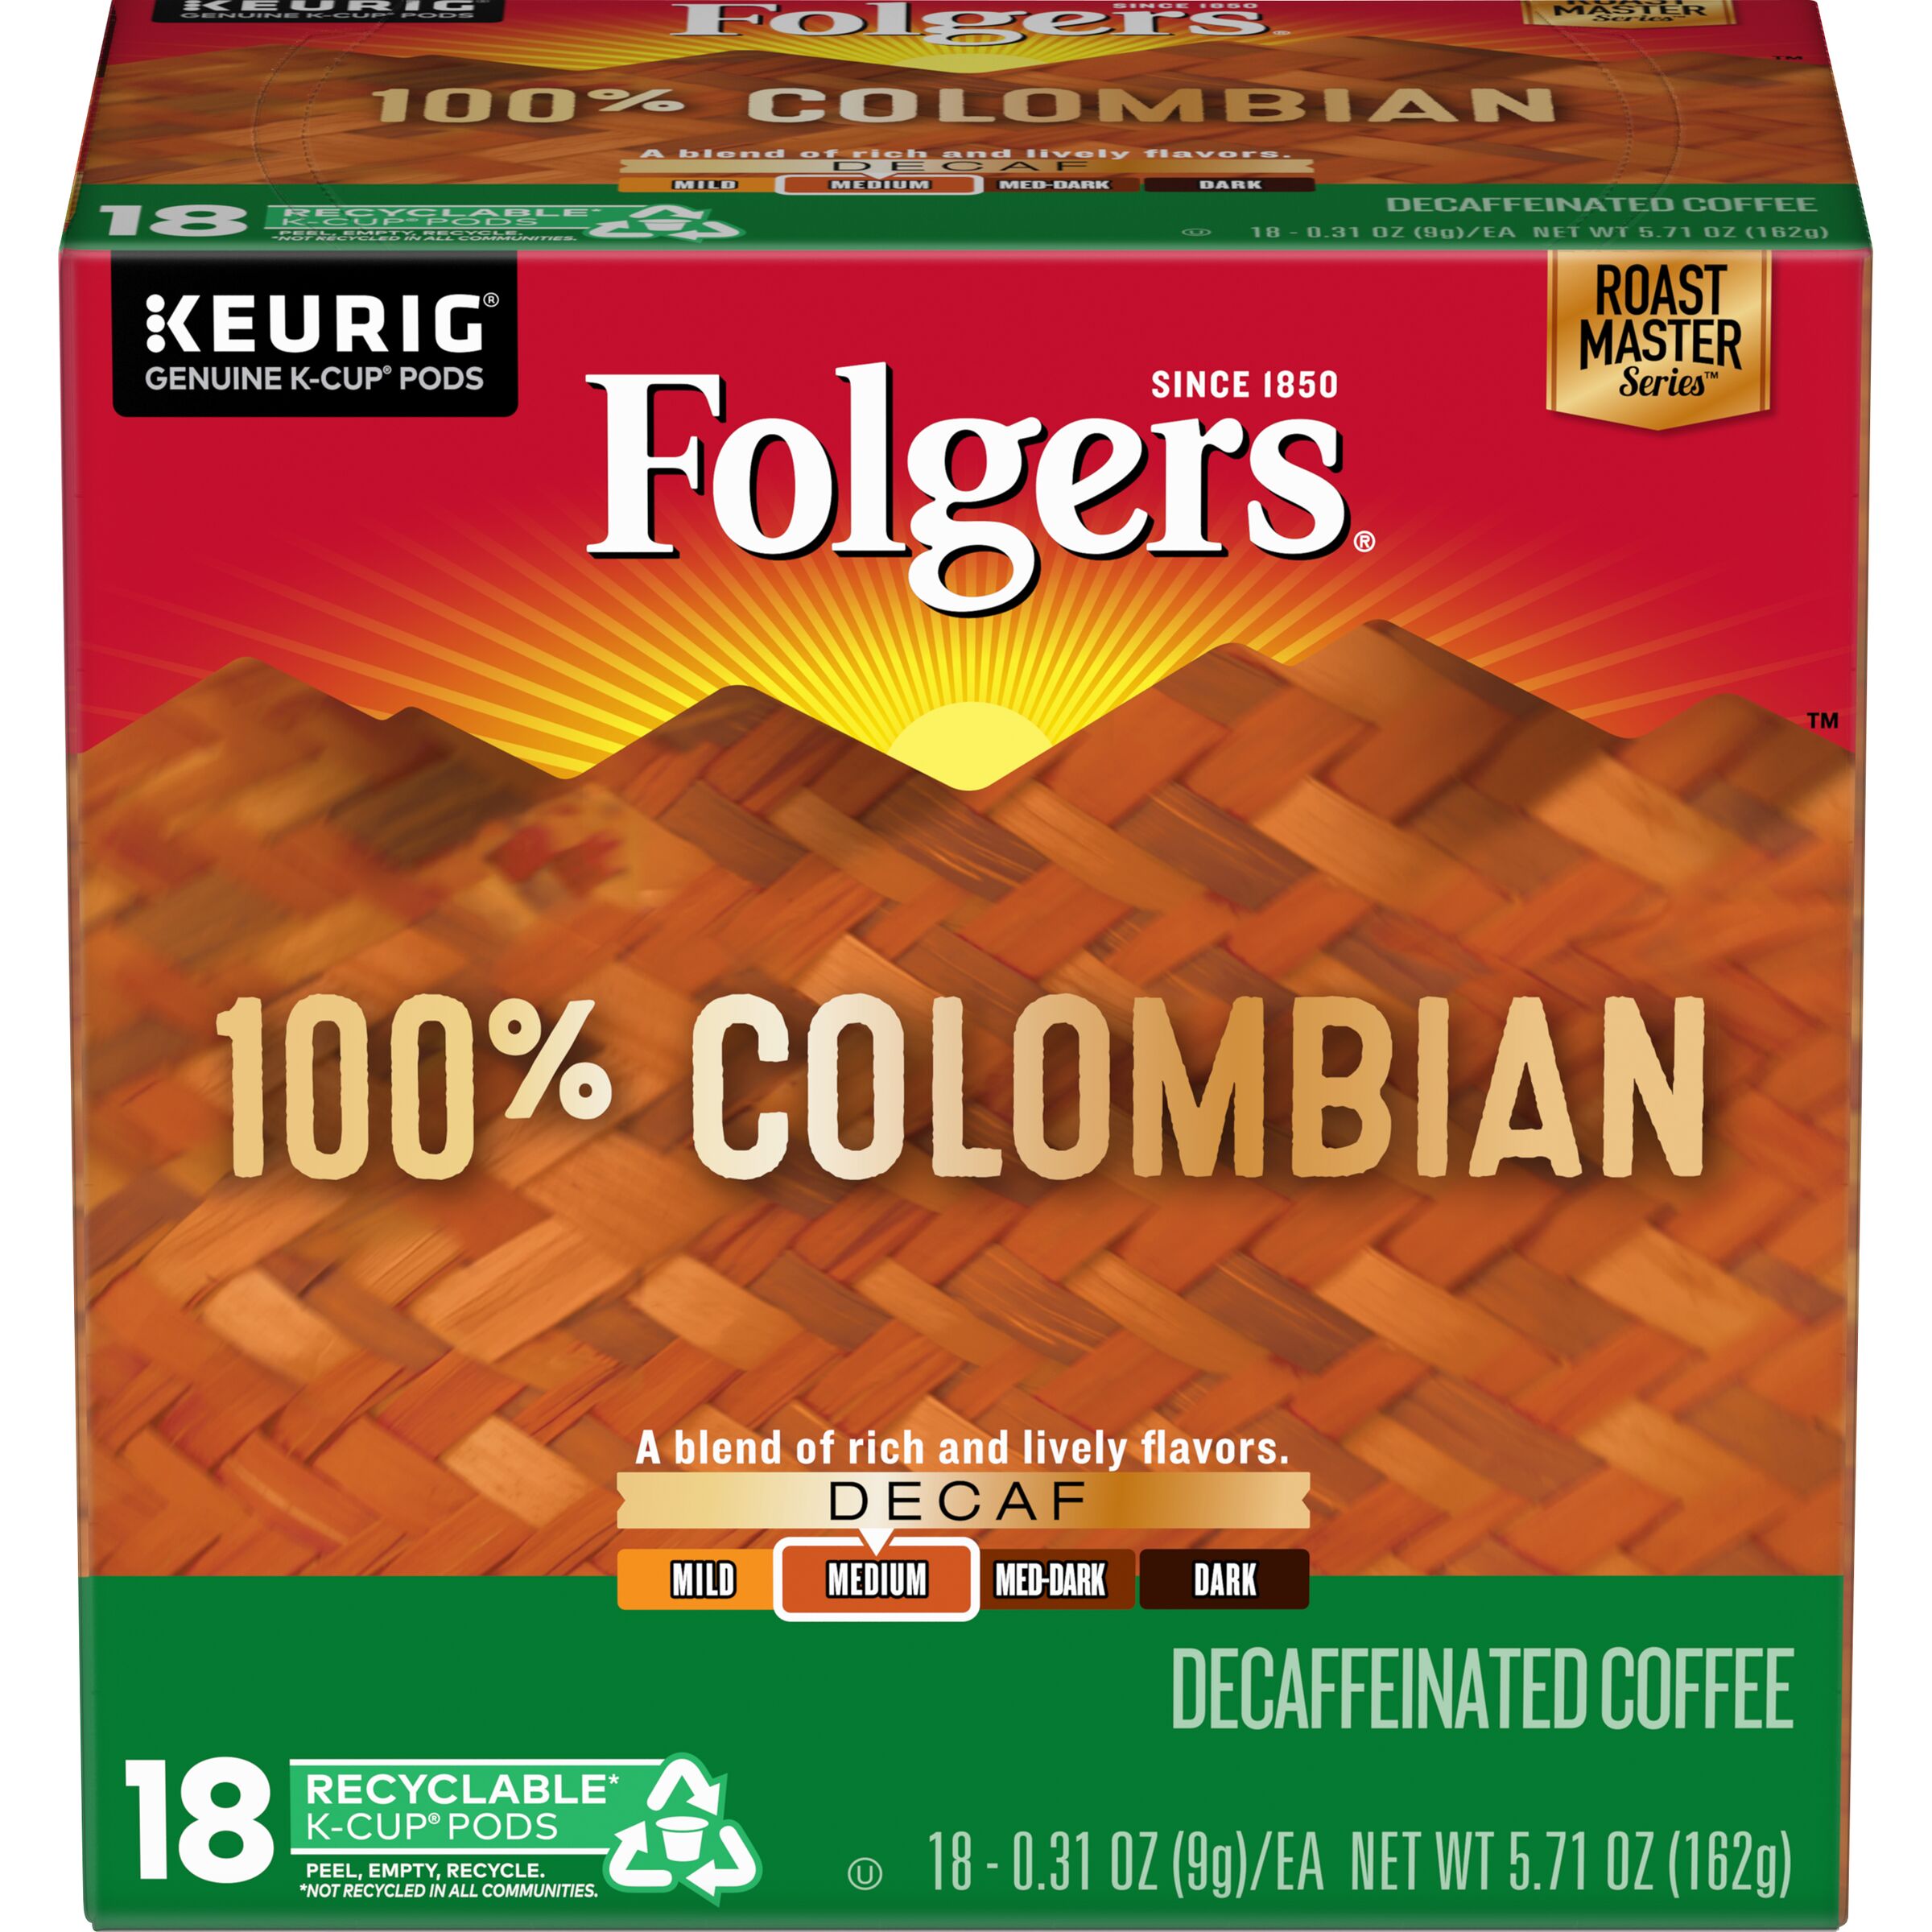 Folgers 100% Colombian Decaf Coffee, Medium-Dark Roast, K-Cup Pods for Keurig K-Cup Brewers, 18-Count - image 1 of 5